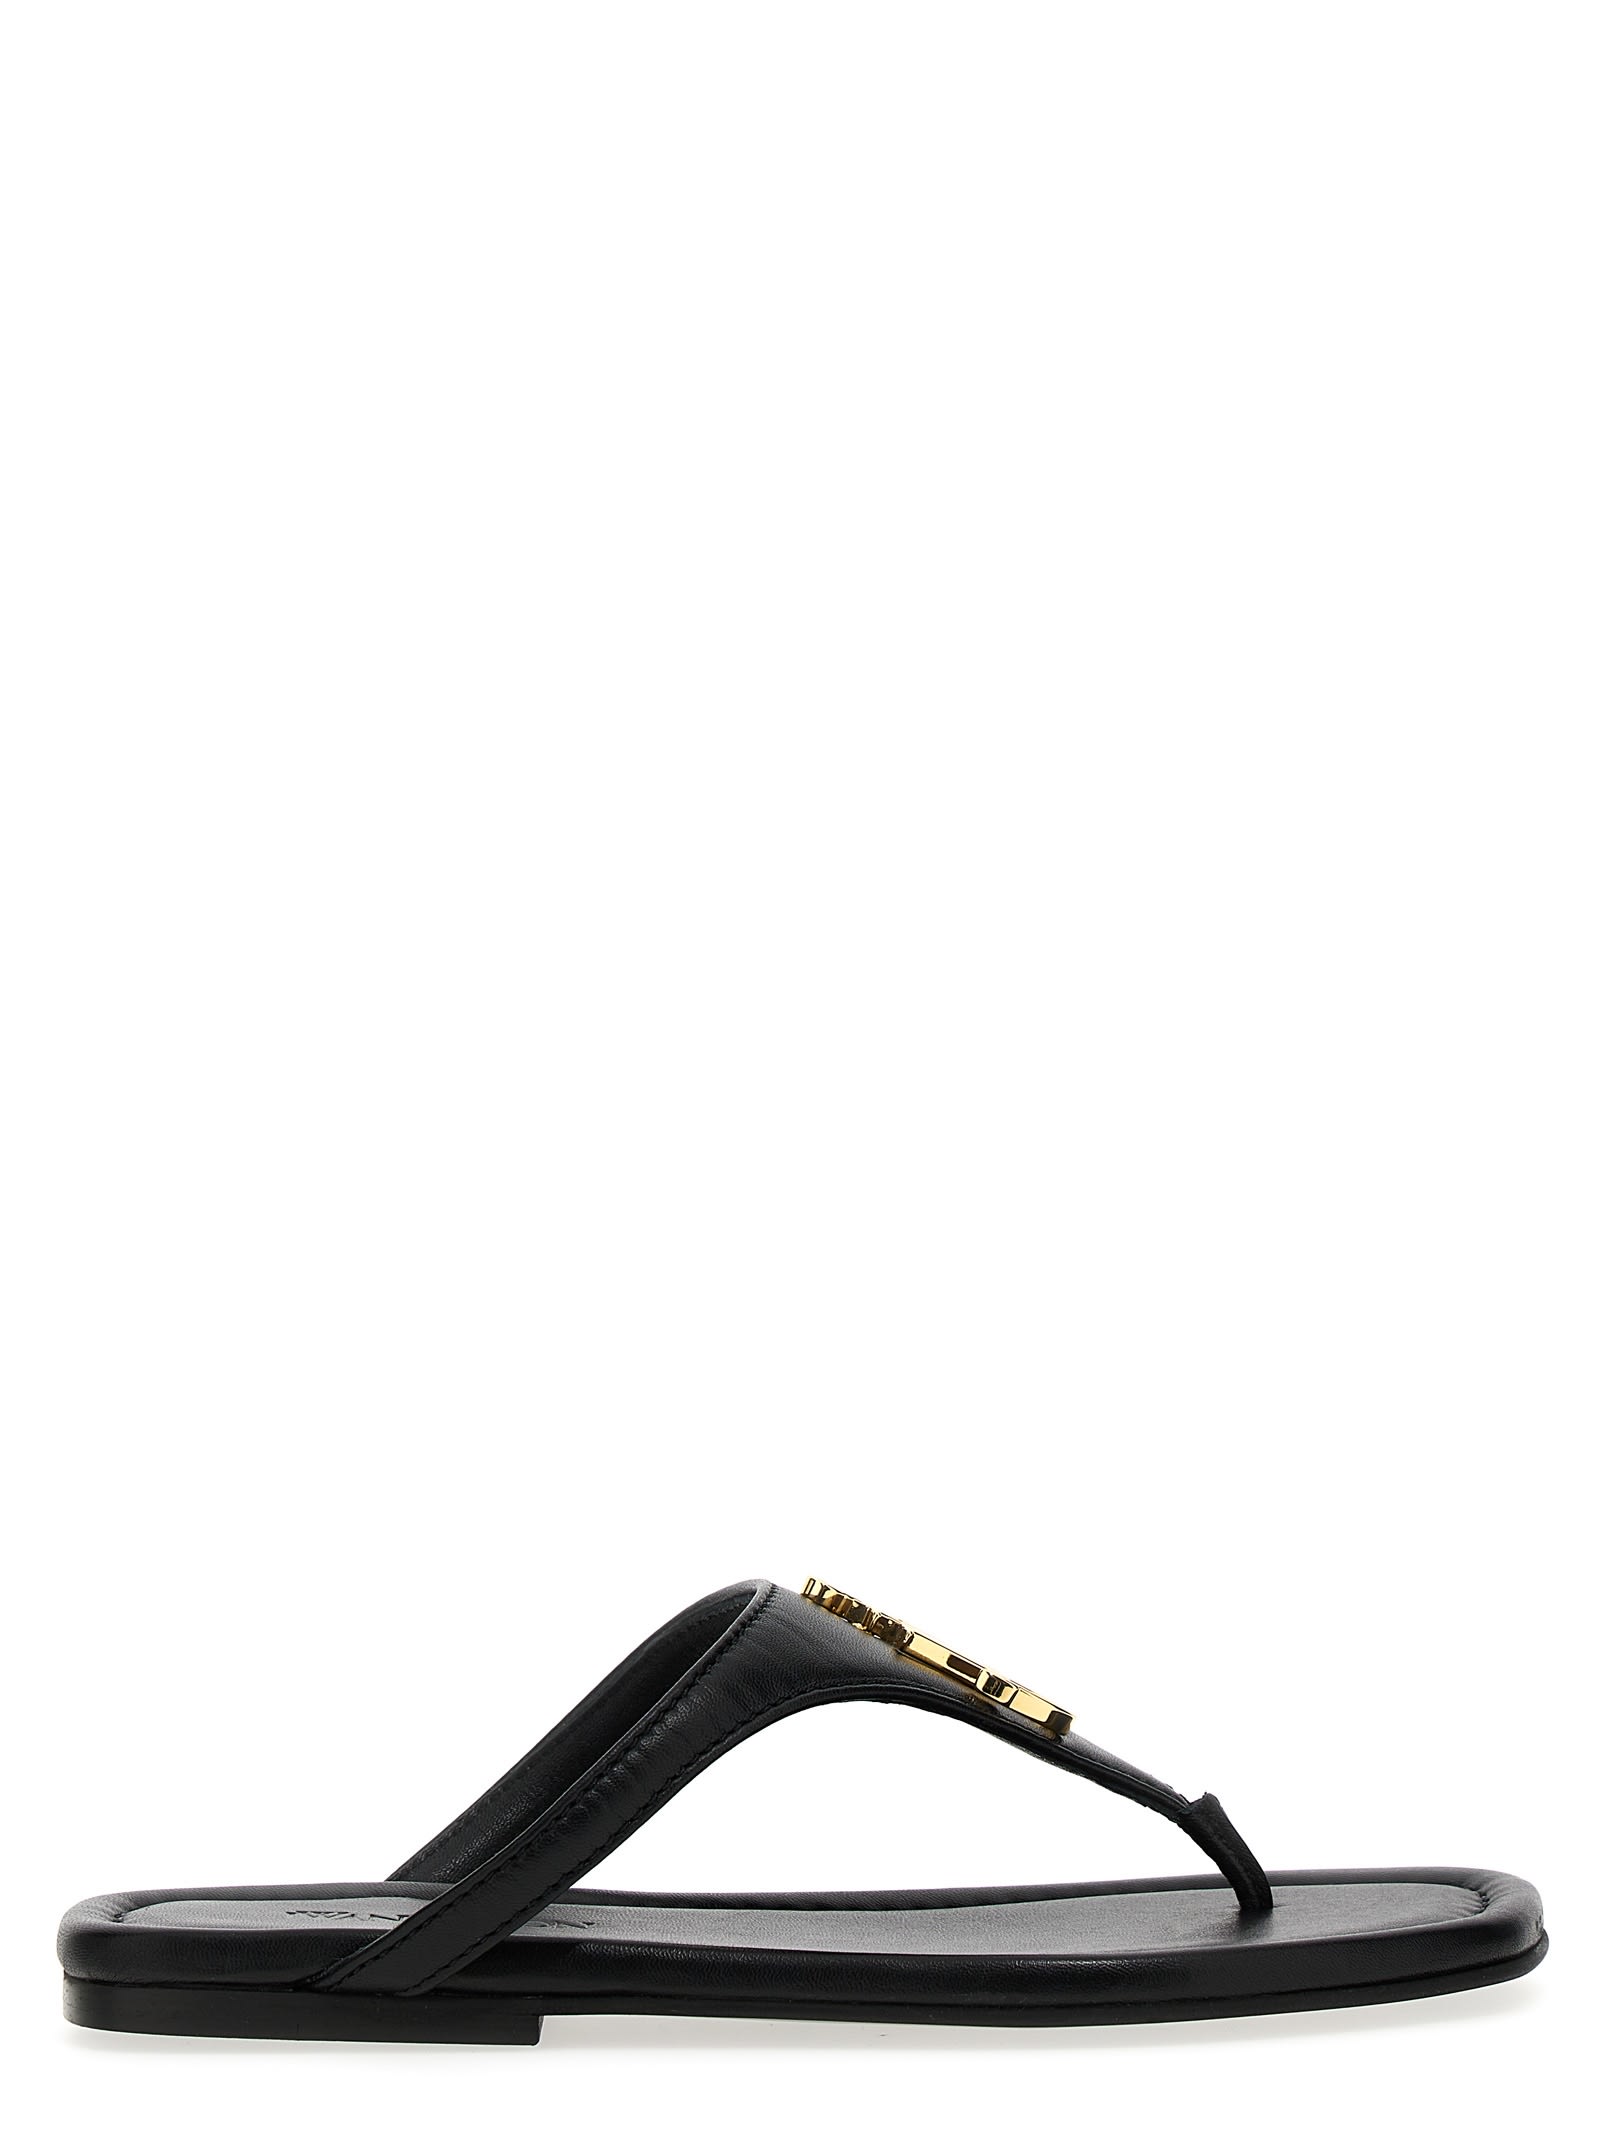 JW ANDERSON ANCHOR SANDALS